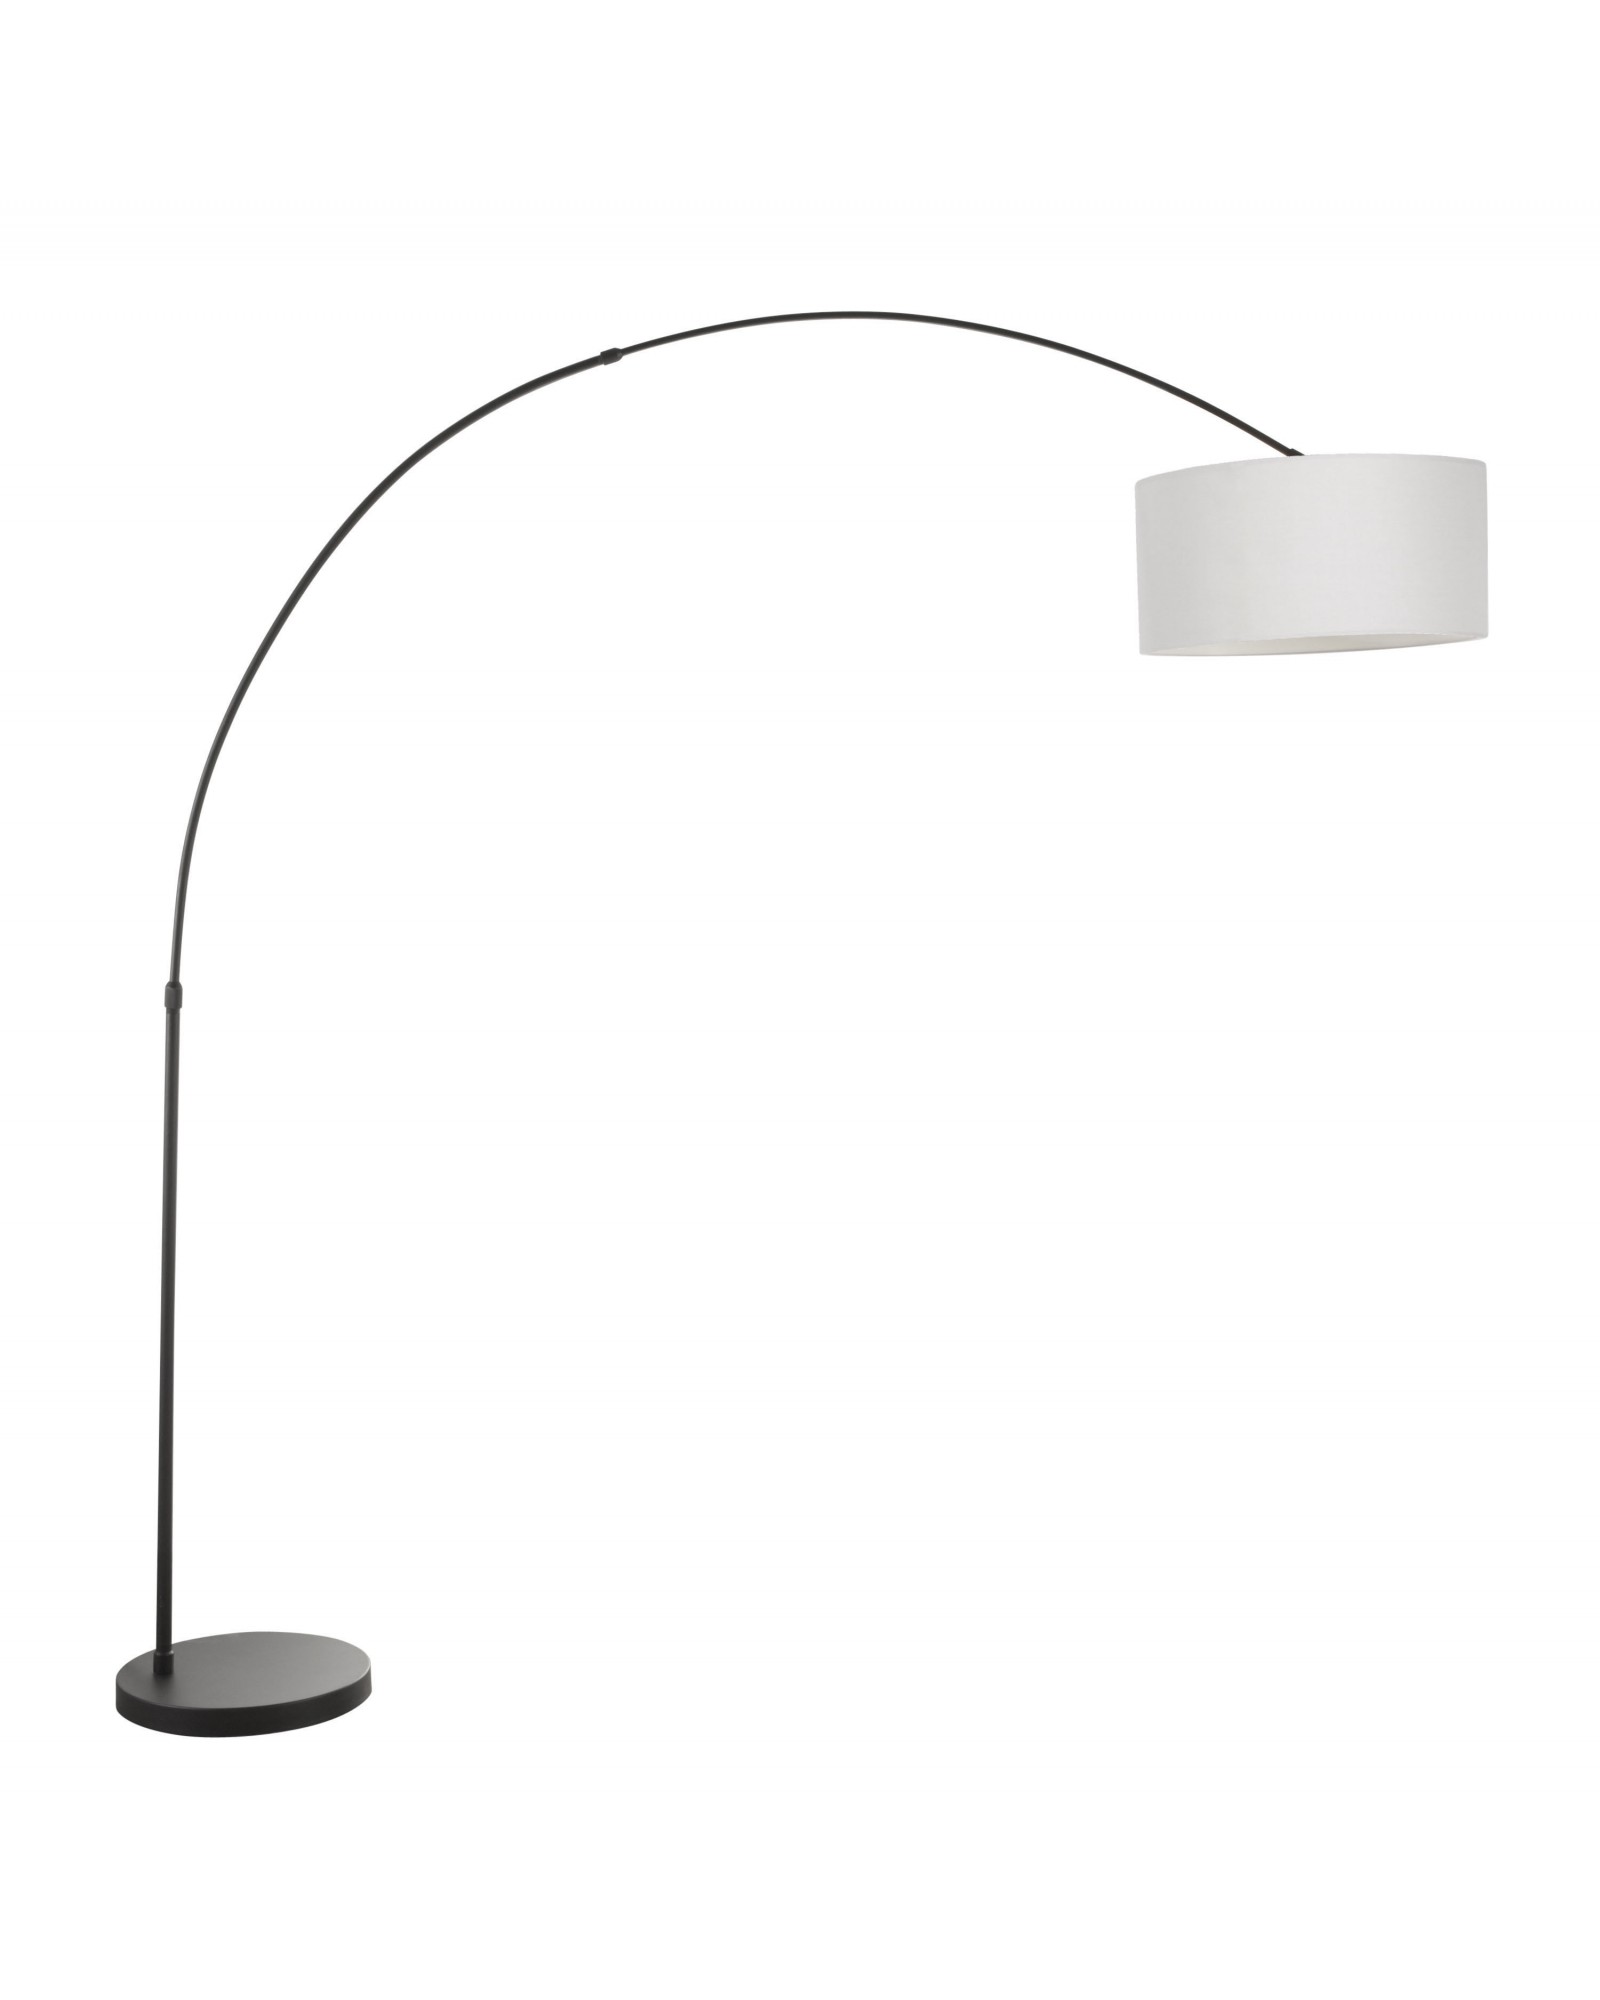 Salon Contemporary Floor Lamp with Black Base and Grey Shade